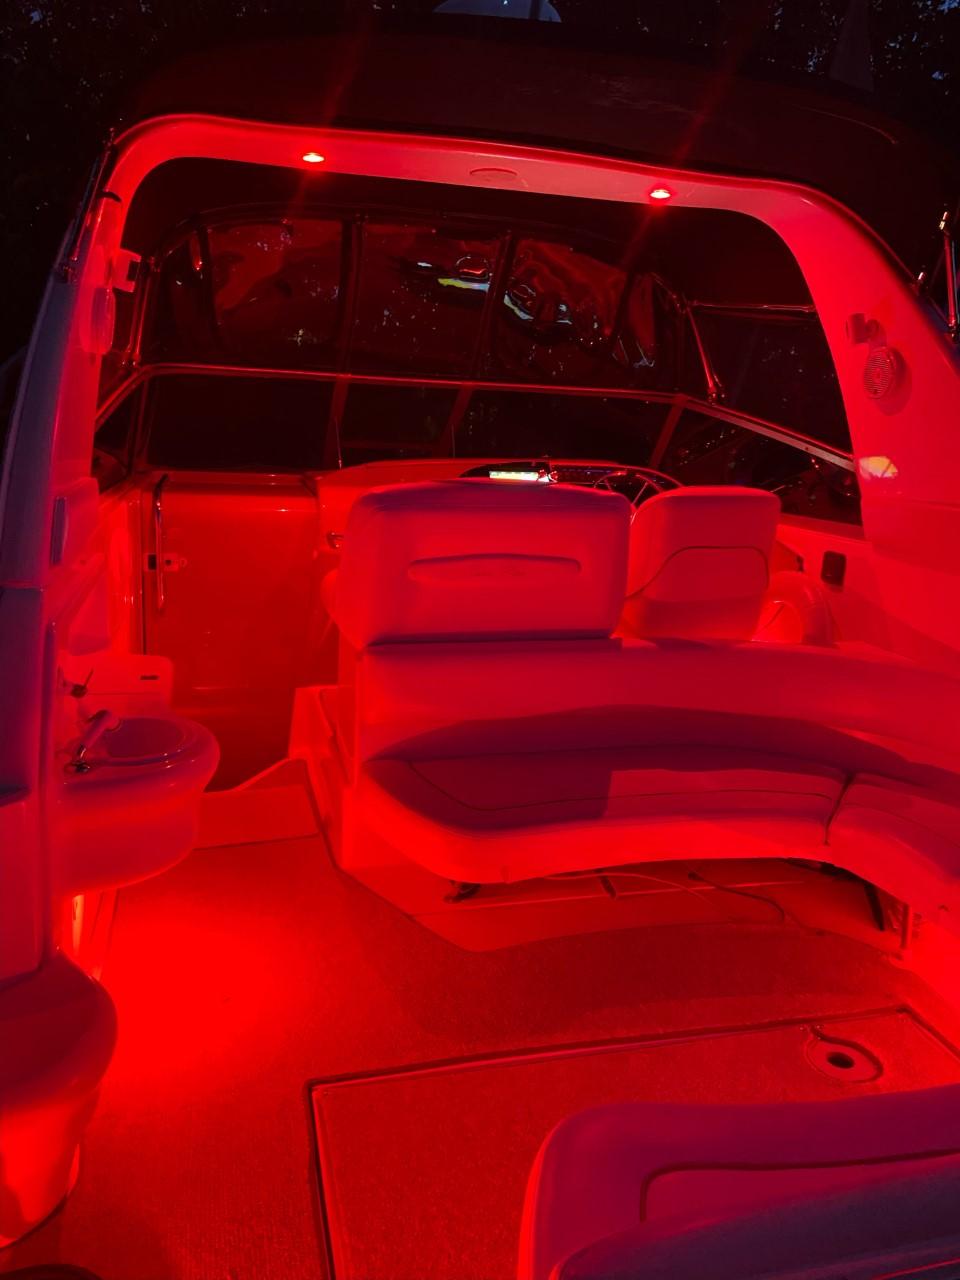 Sea Ray 31 - Red LED lights on Aft Deck